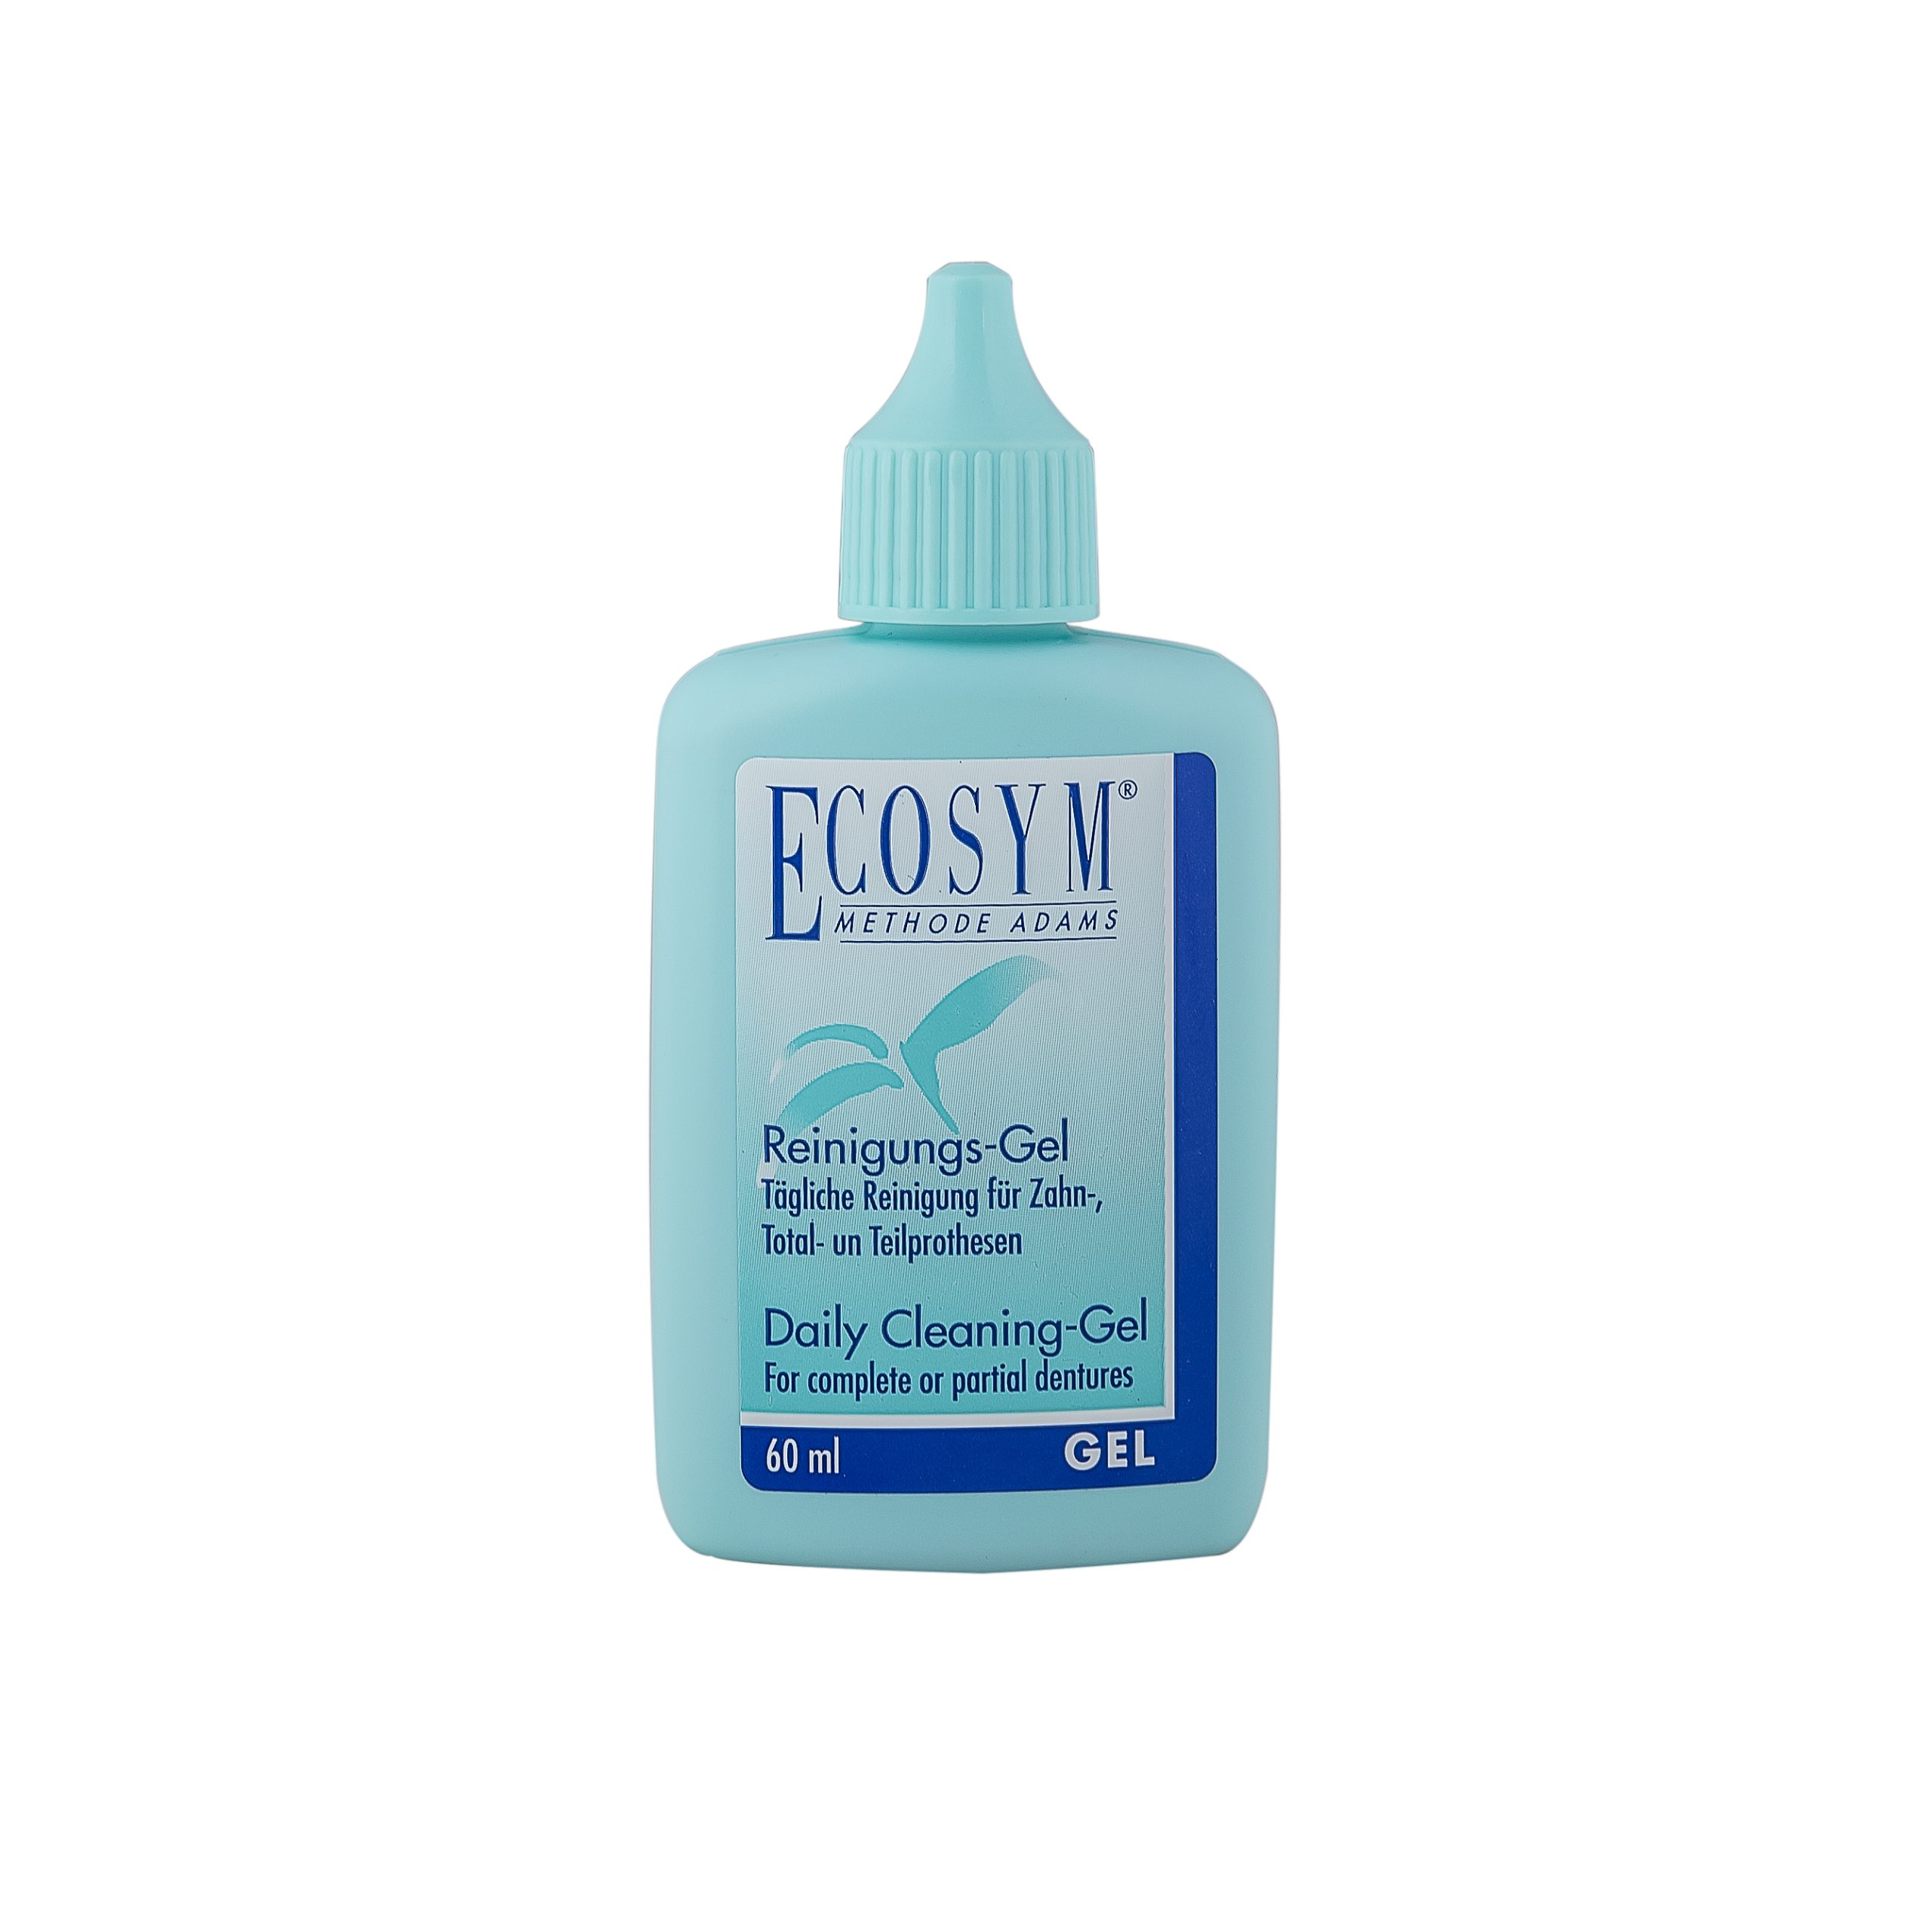 Ecosym Daily Cleaning Gel 60 ml